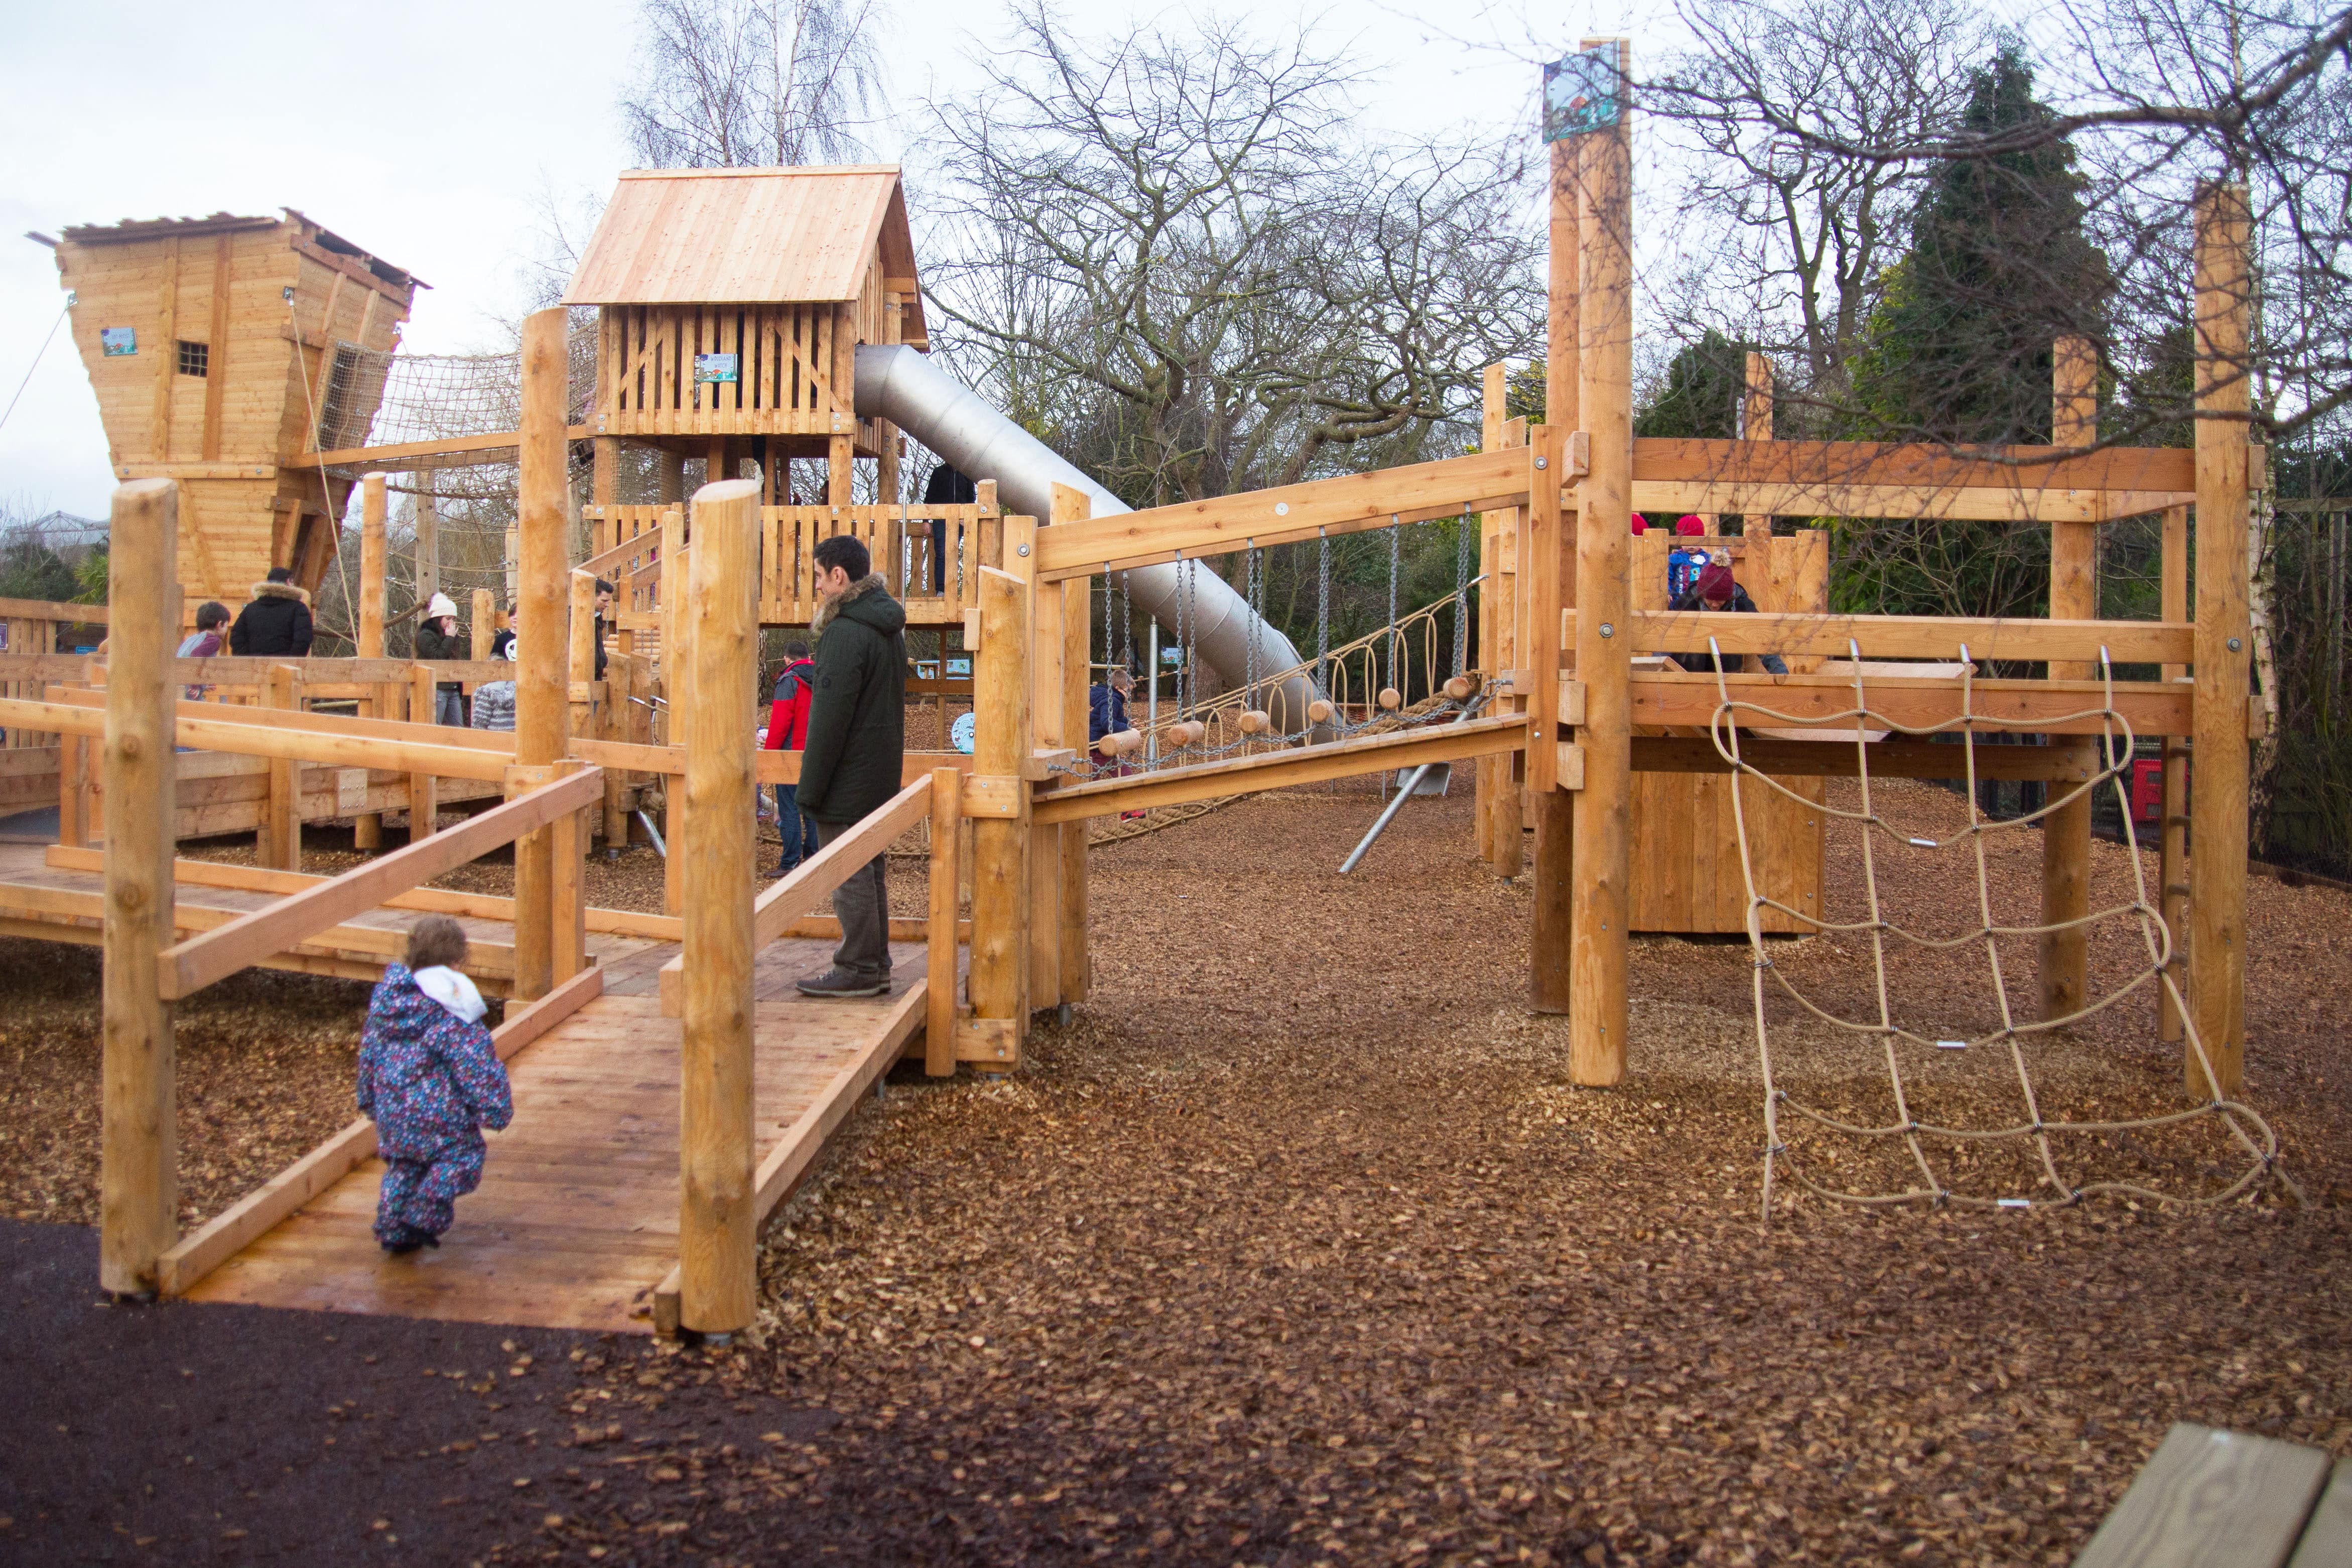 Inclusive play equipment in the UK